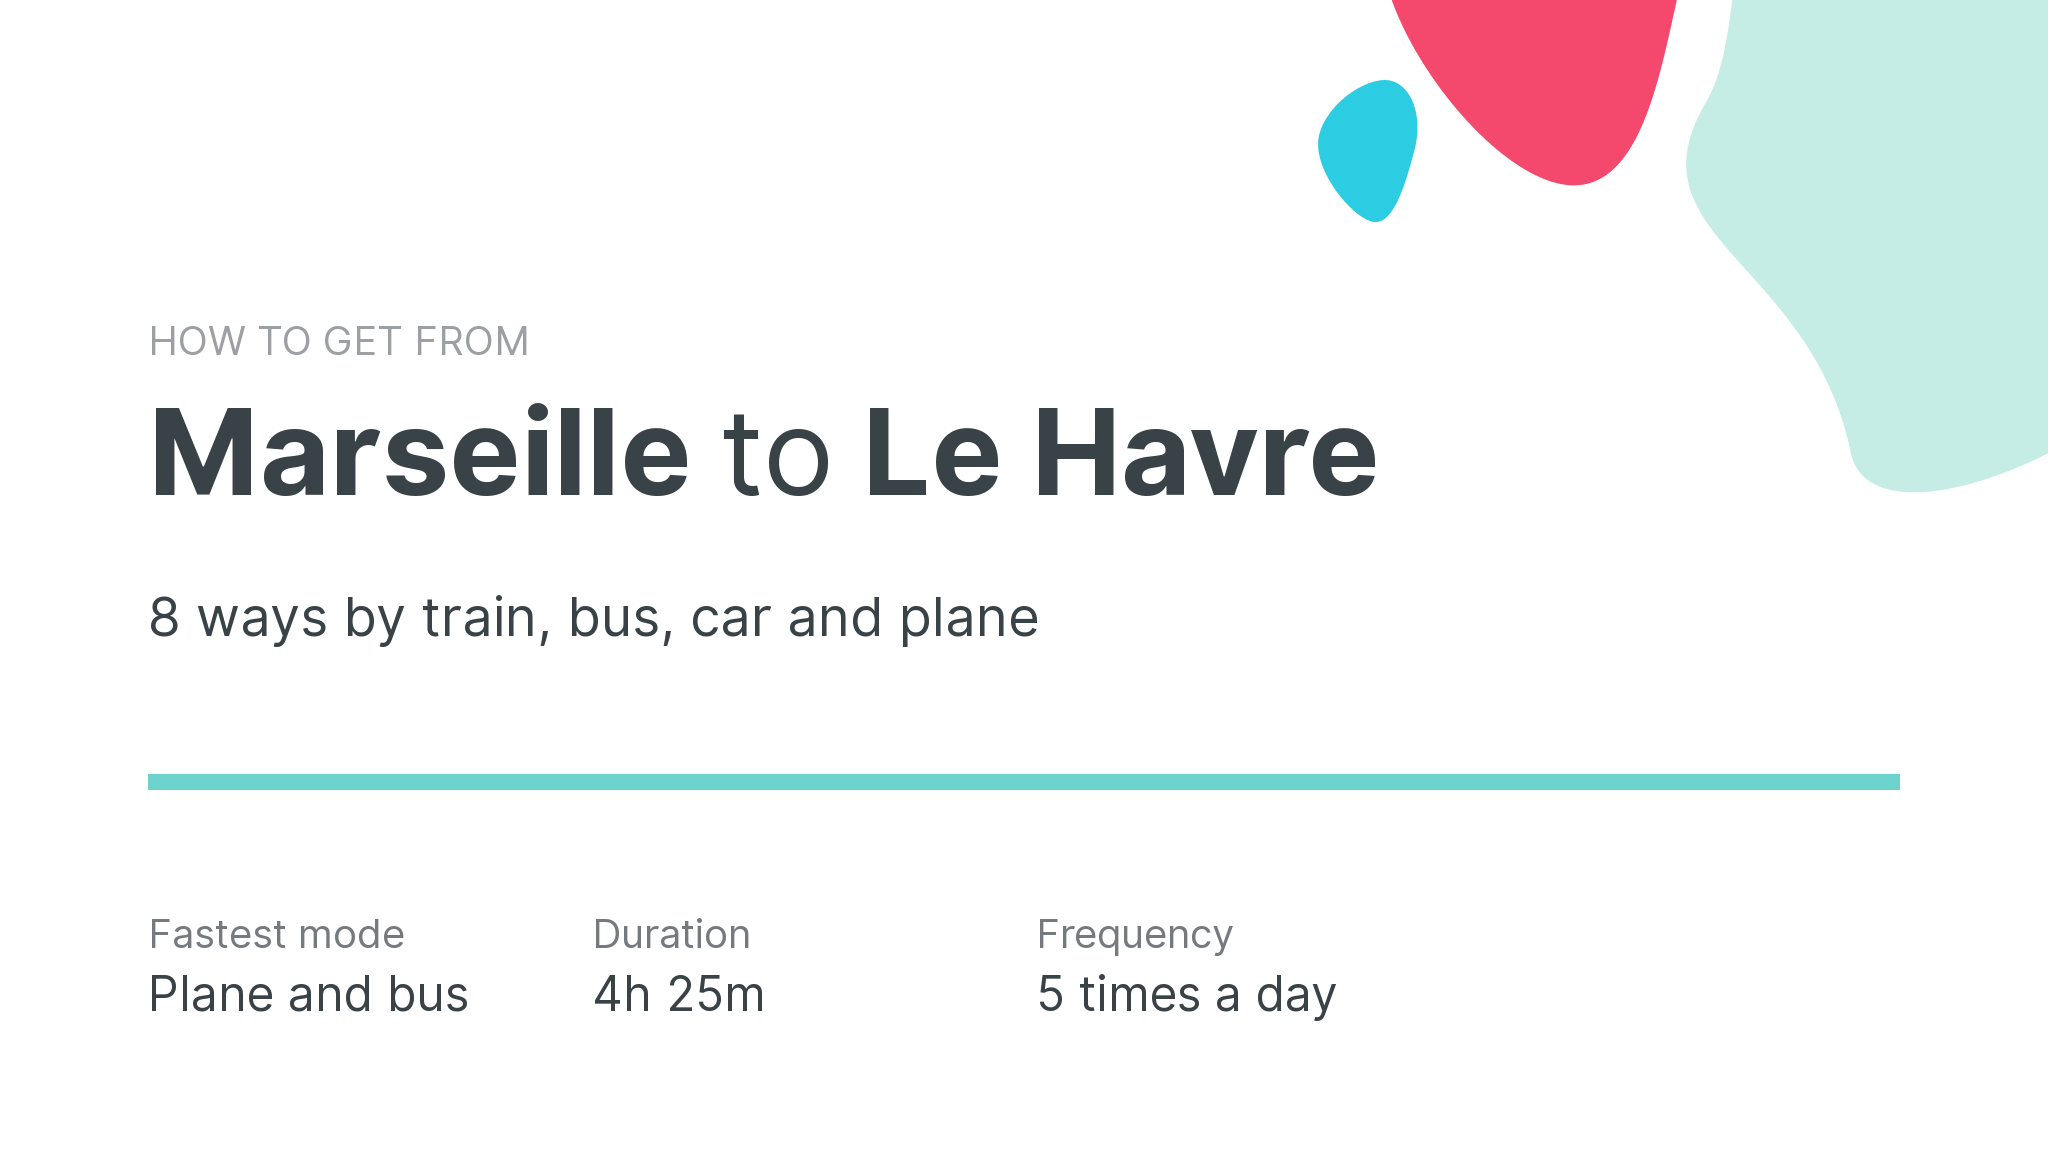 How do I get from Marseille to Le Havre